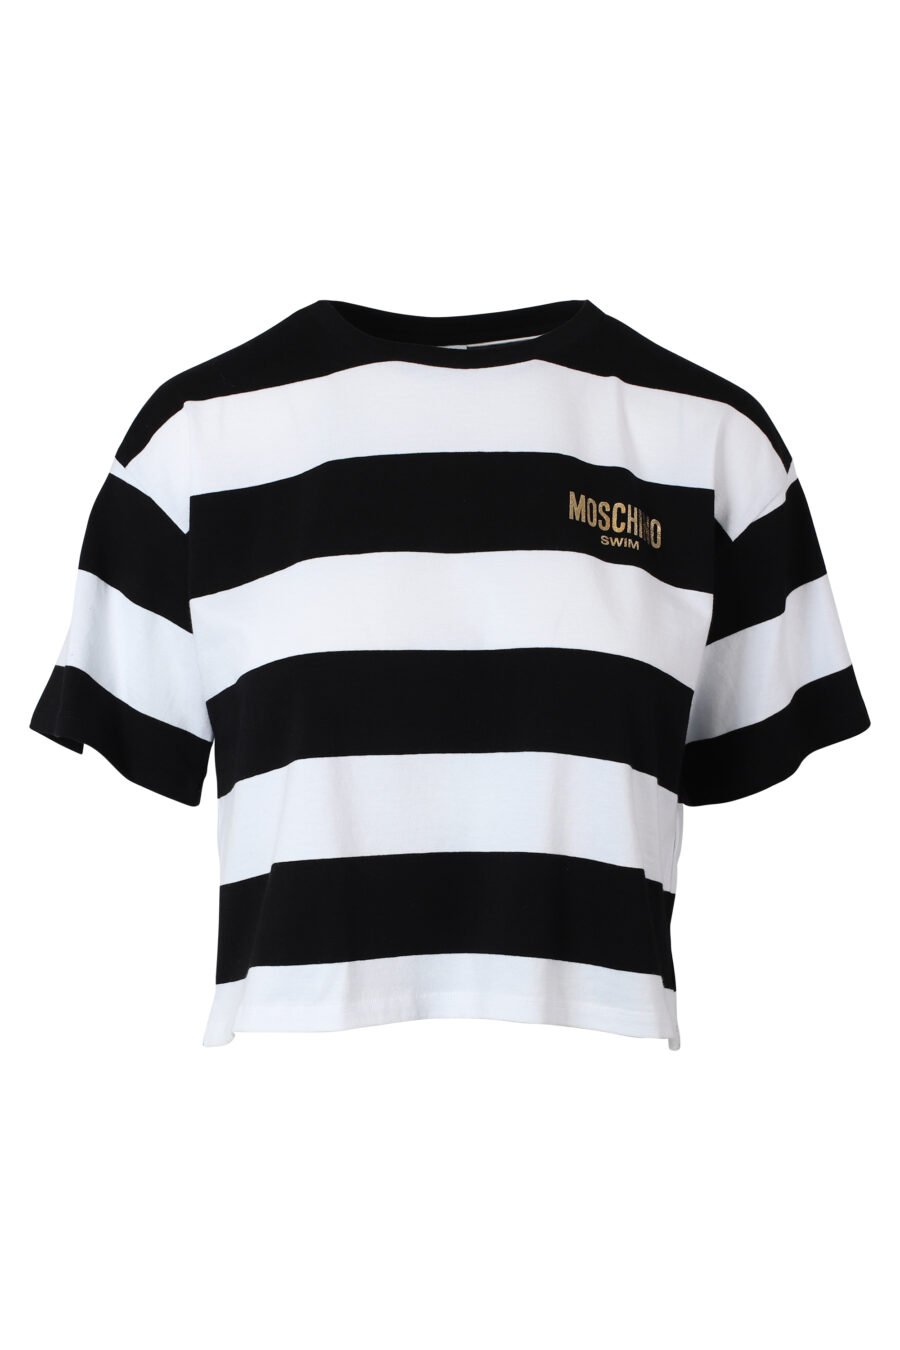 Two-coloured black and white striped T-shirt with gold mini-logo - IMG 9797